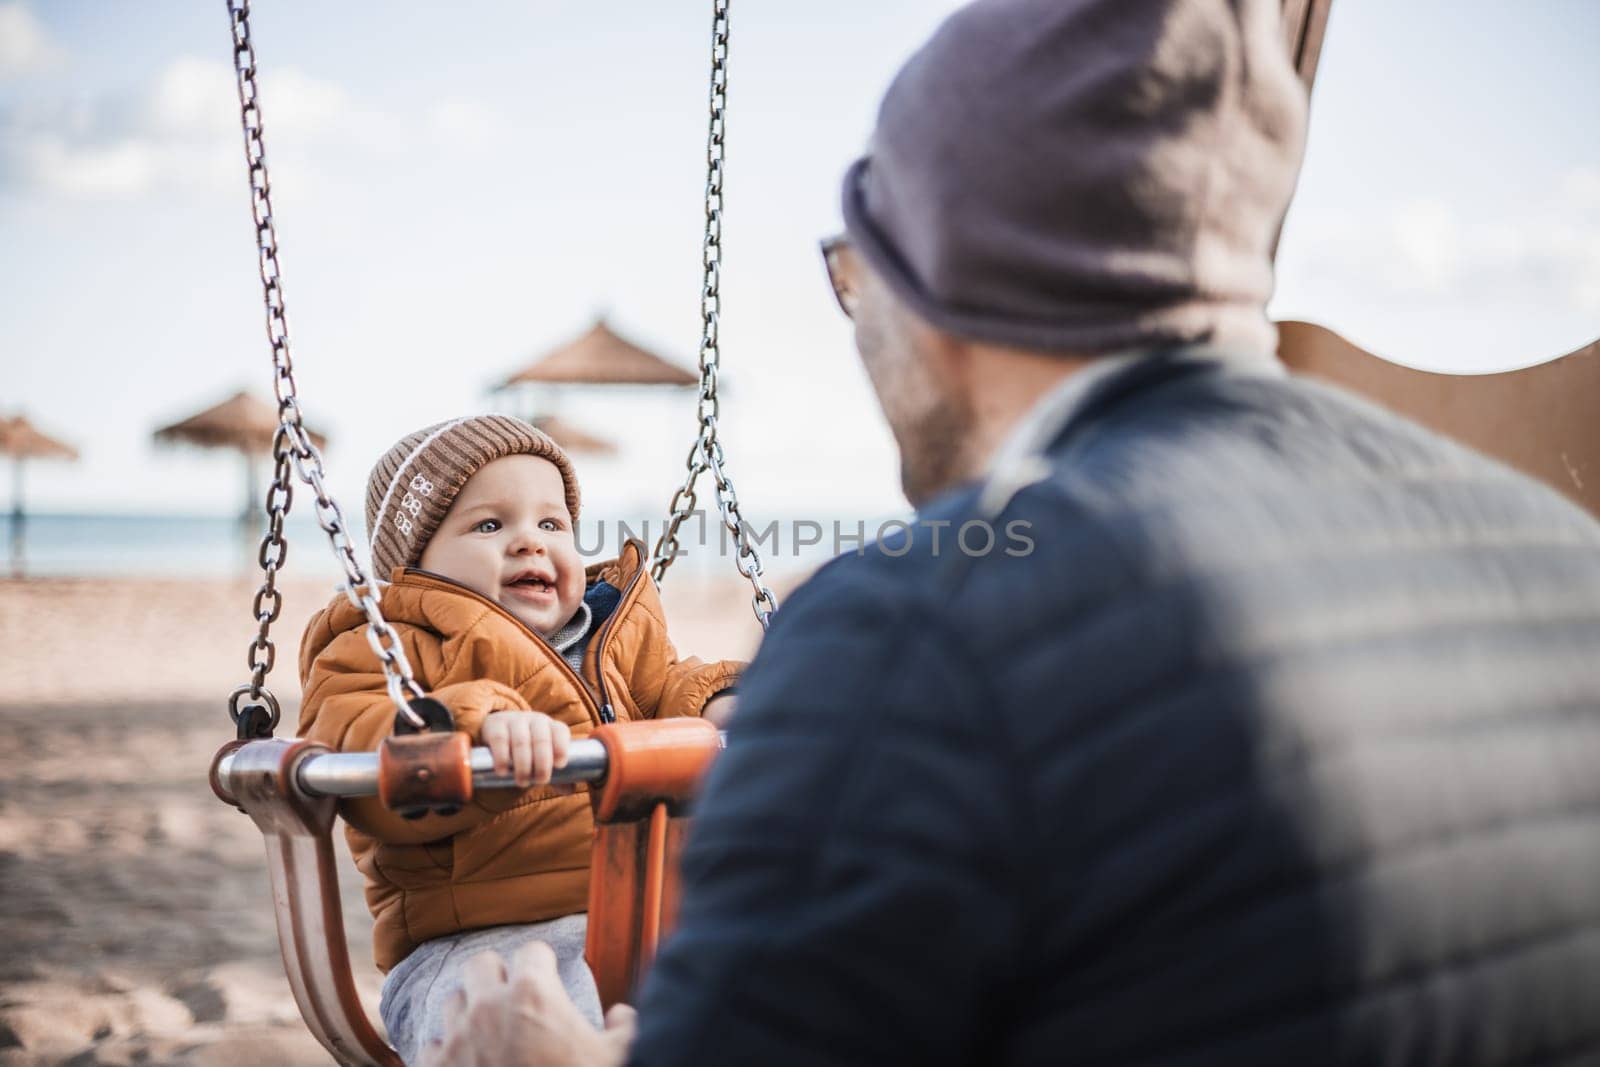 Father pushing hir cheerful infant baby boy child on a swing on sandy beach playground outdoors on nice sunny cold winter day in Malaga, Spain